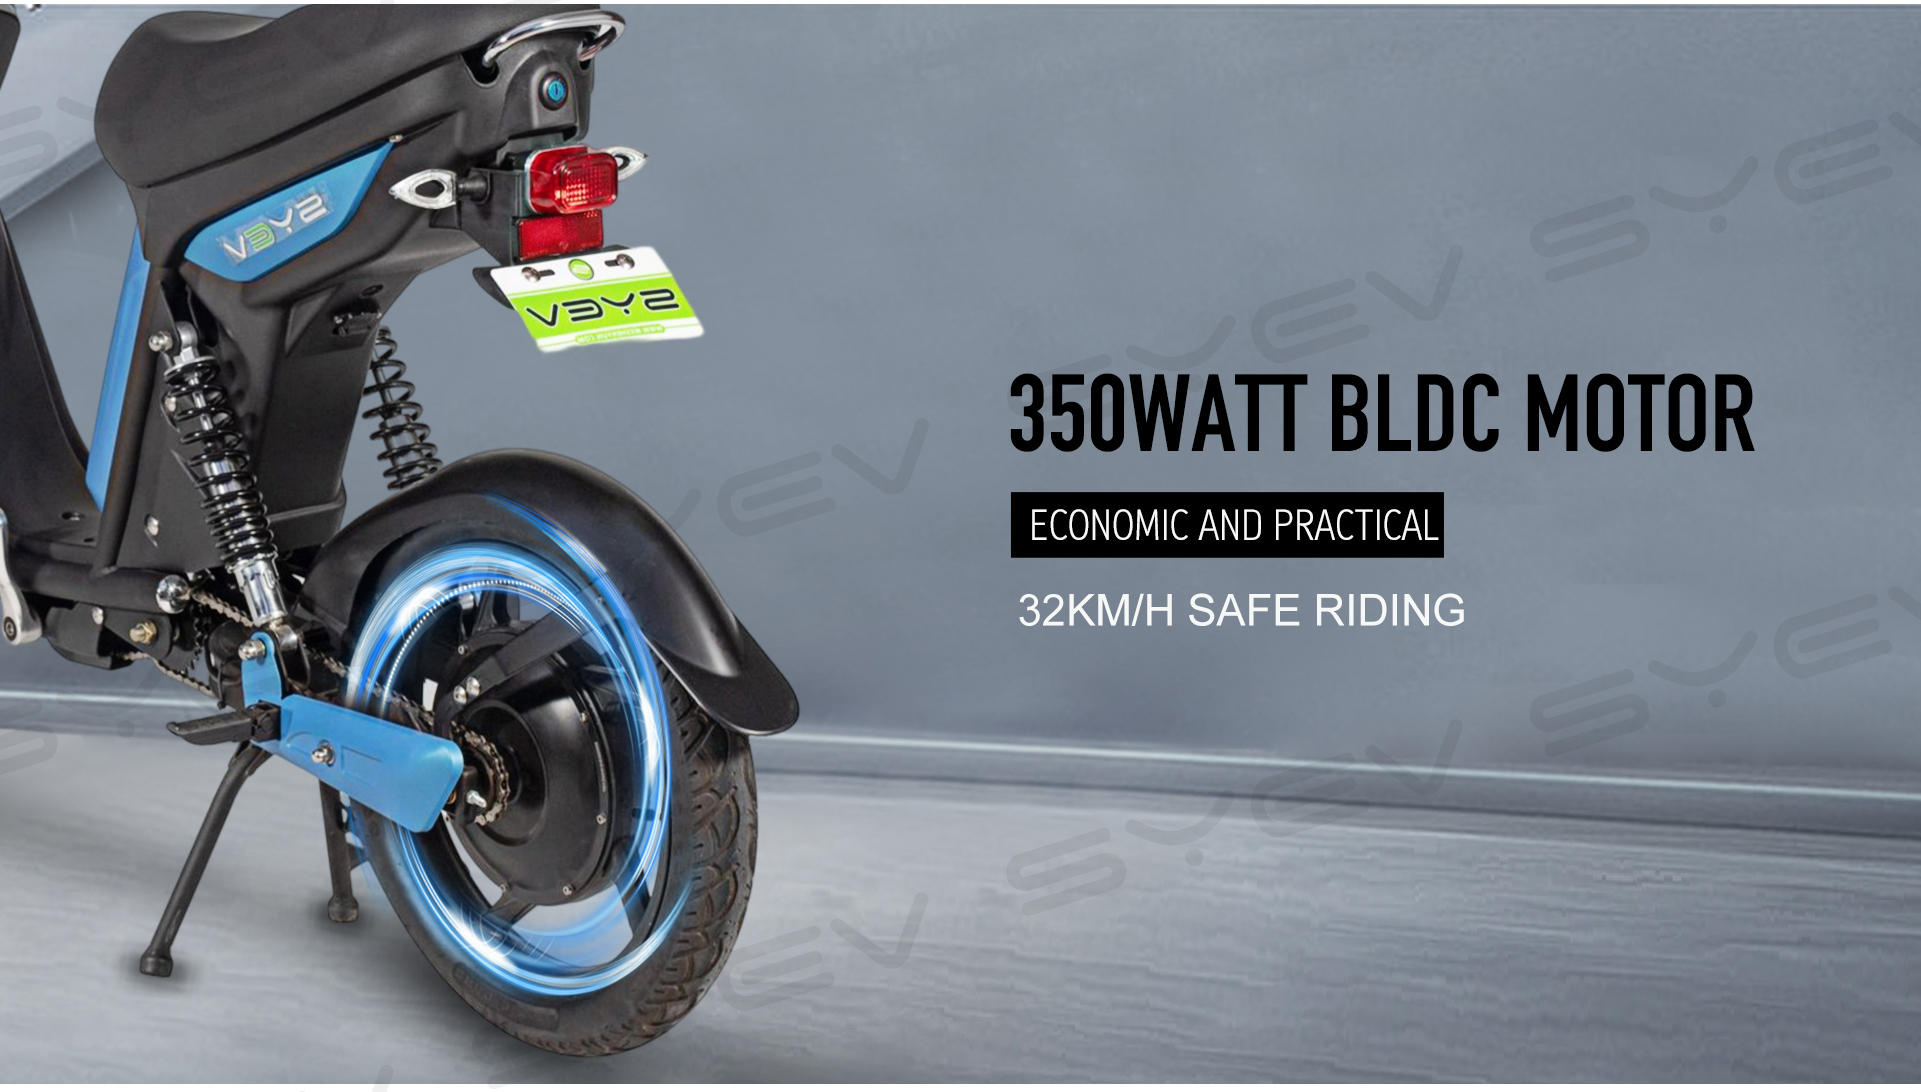 The concept and working principle of the Electric Bike